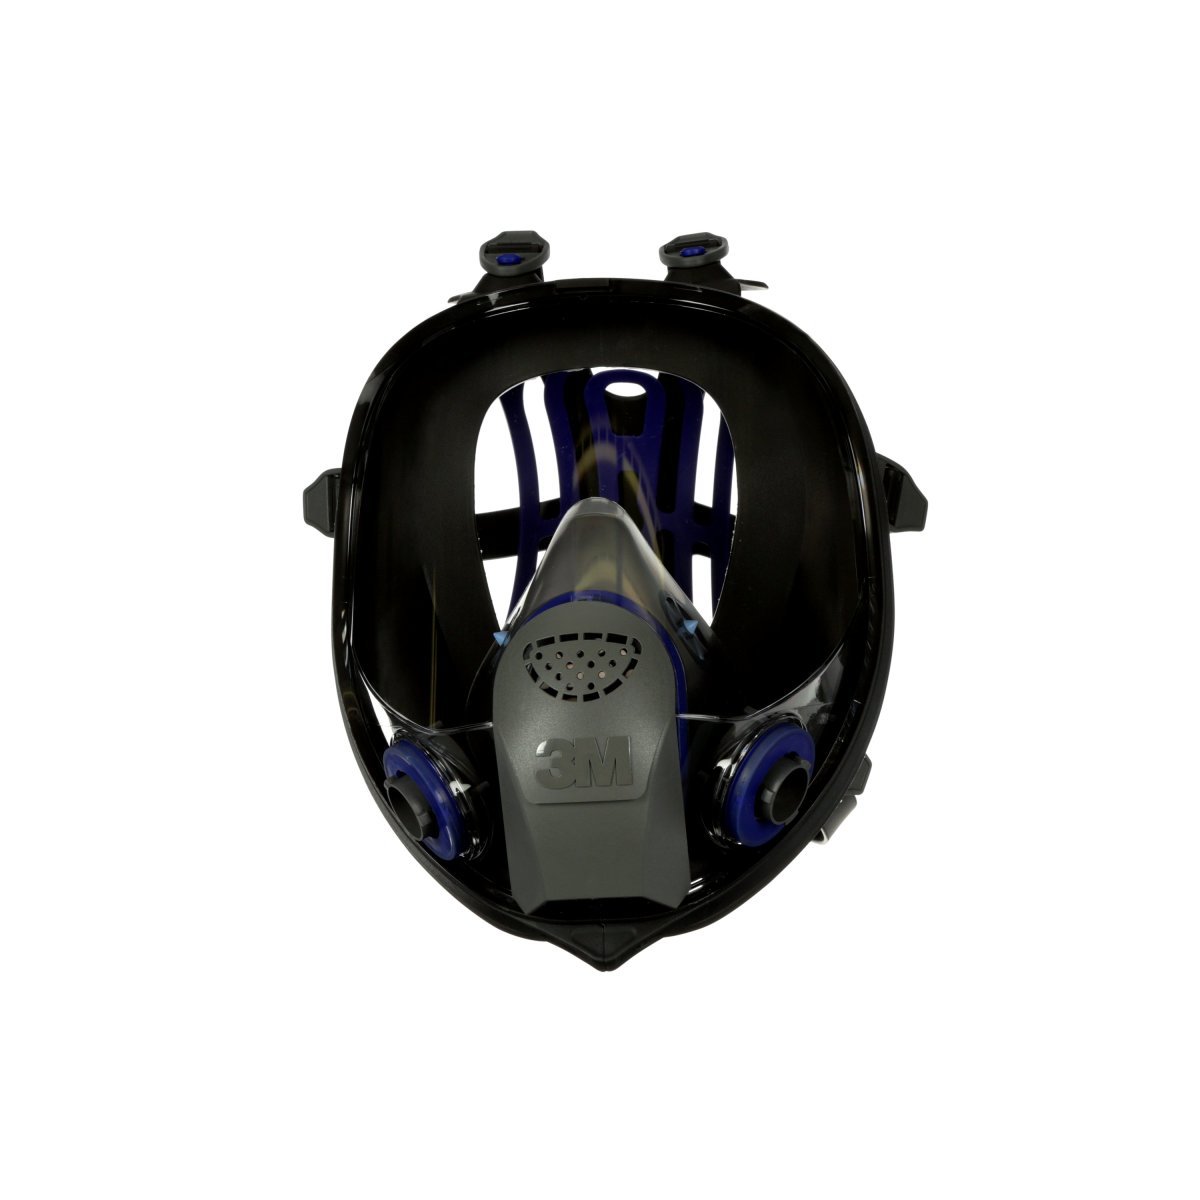 3M™ Large FF-403 Series Full Face Ultimate FX Air Purifying Respirator With 6 Point Harness (Availability restrictions apply.)